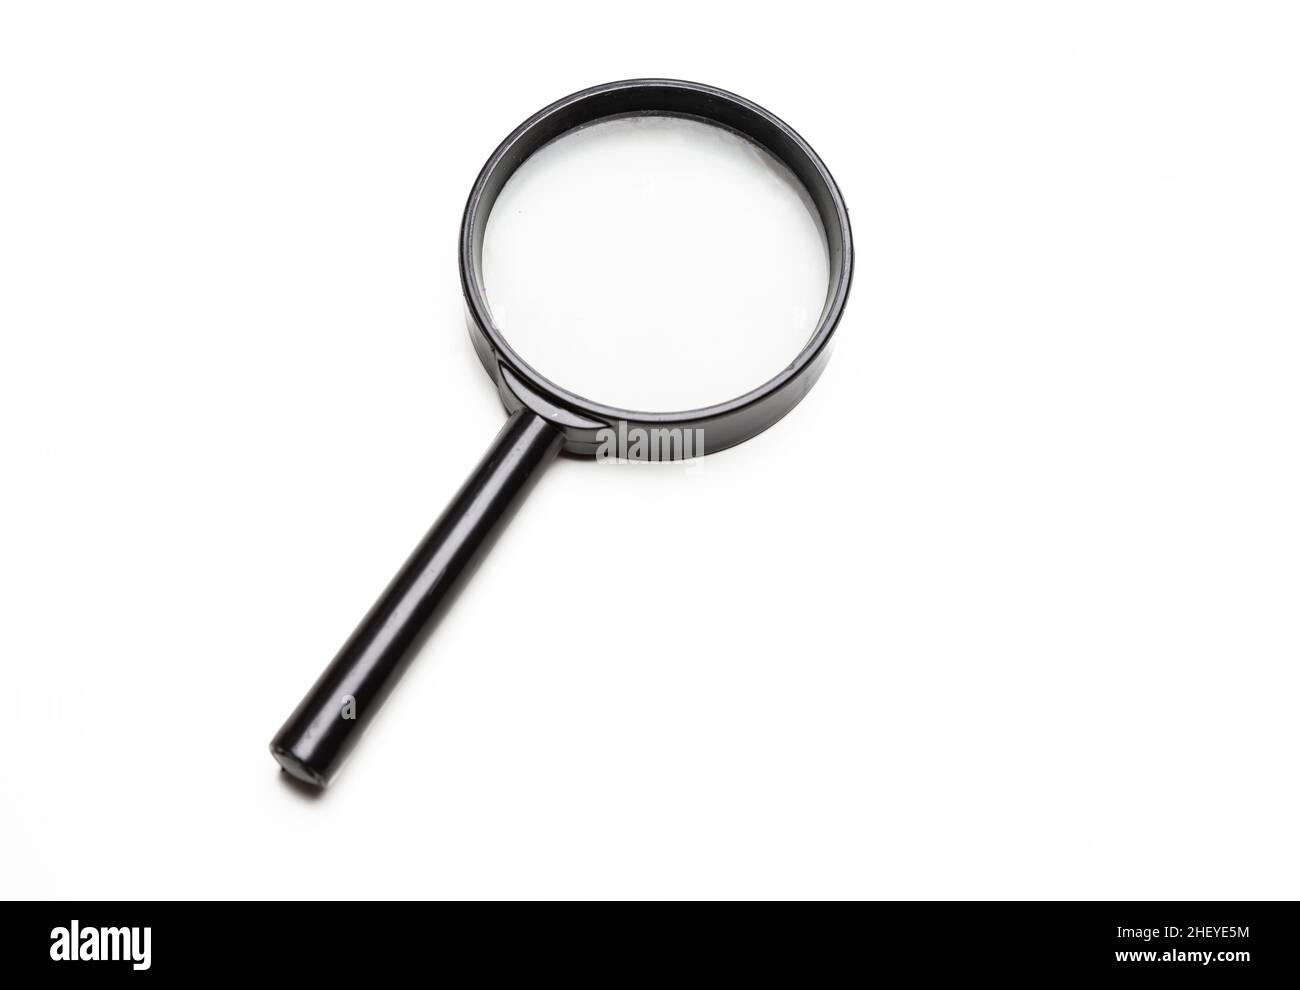 Magnifying glass. Magnify tool isolated cutout on white background. Loupe with black metal frame and handle. Search, focus concept Stock Photo